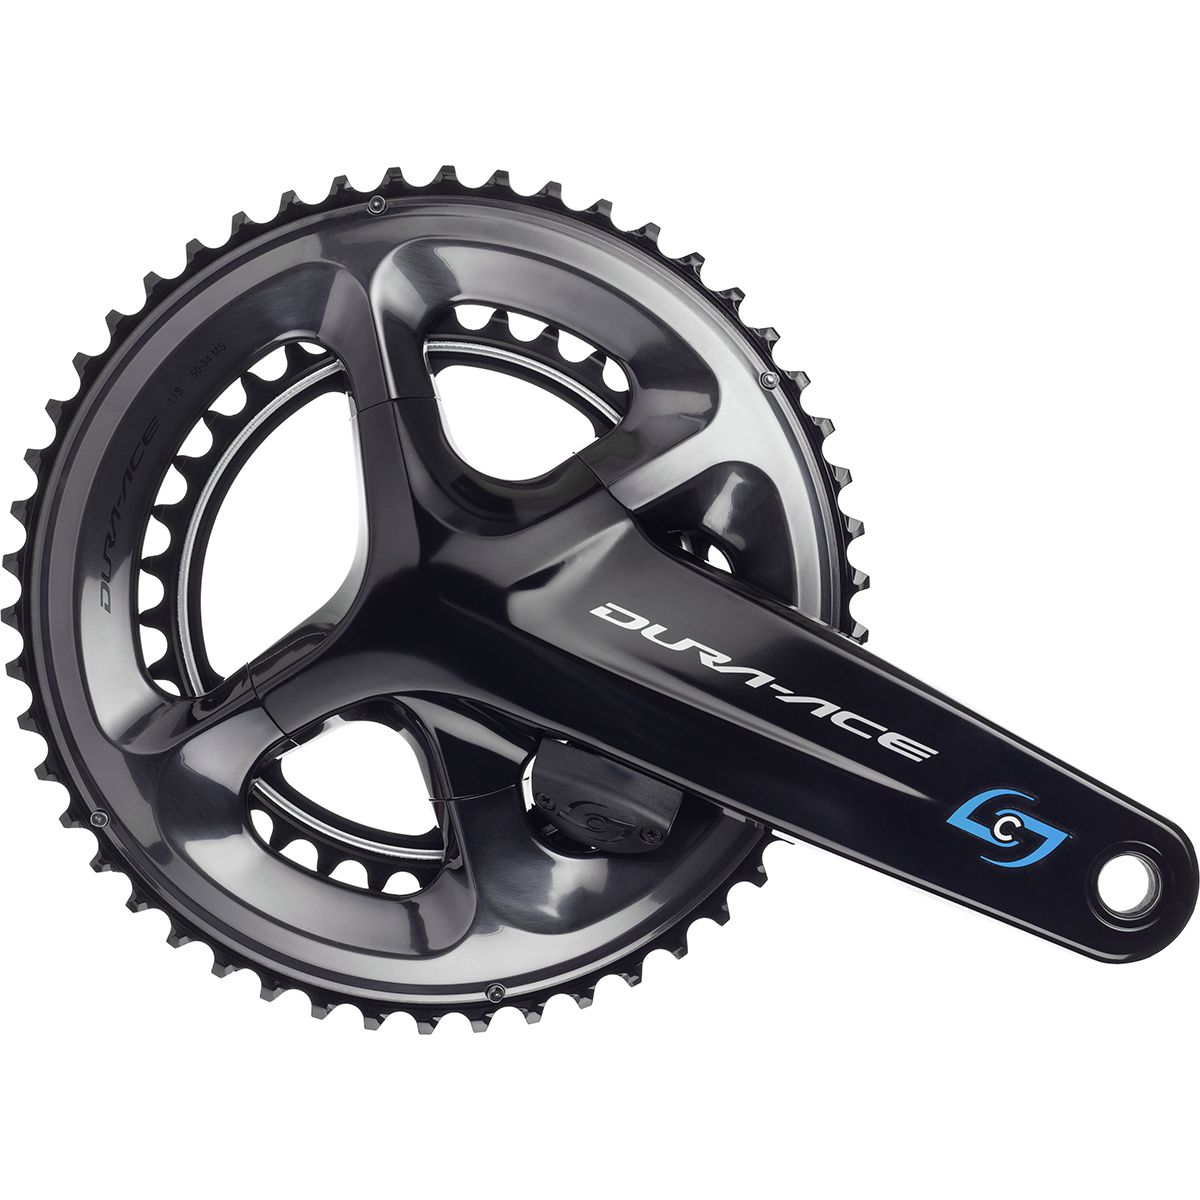 Stages Cycling Shimano Dura-Ace R9100 R Power Meter Crank Arm